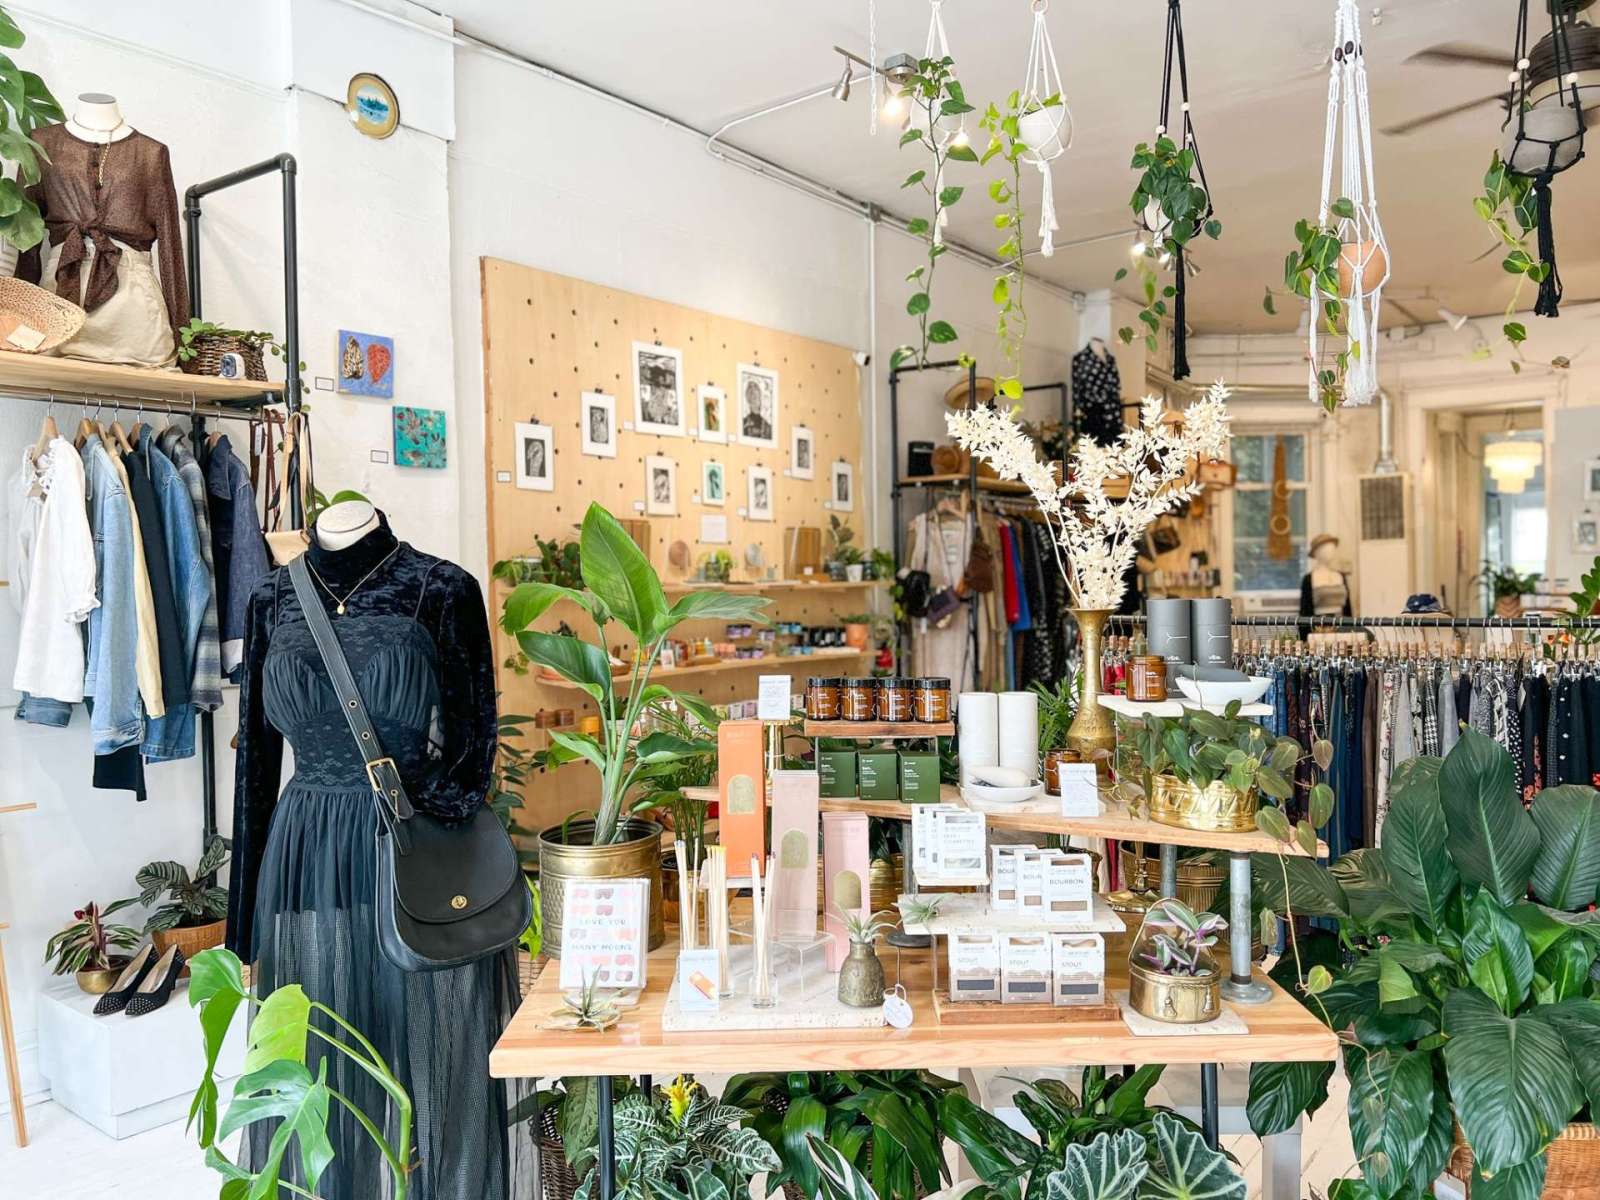 8 Women-Owned Businesses in Chicago You Should Visit